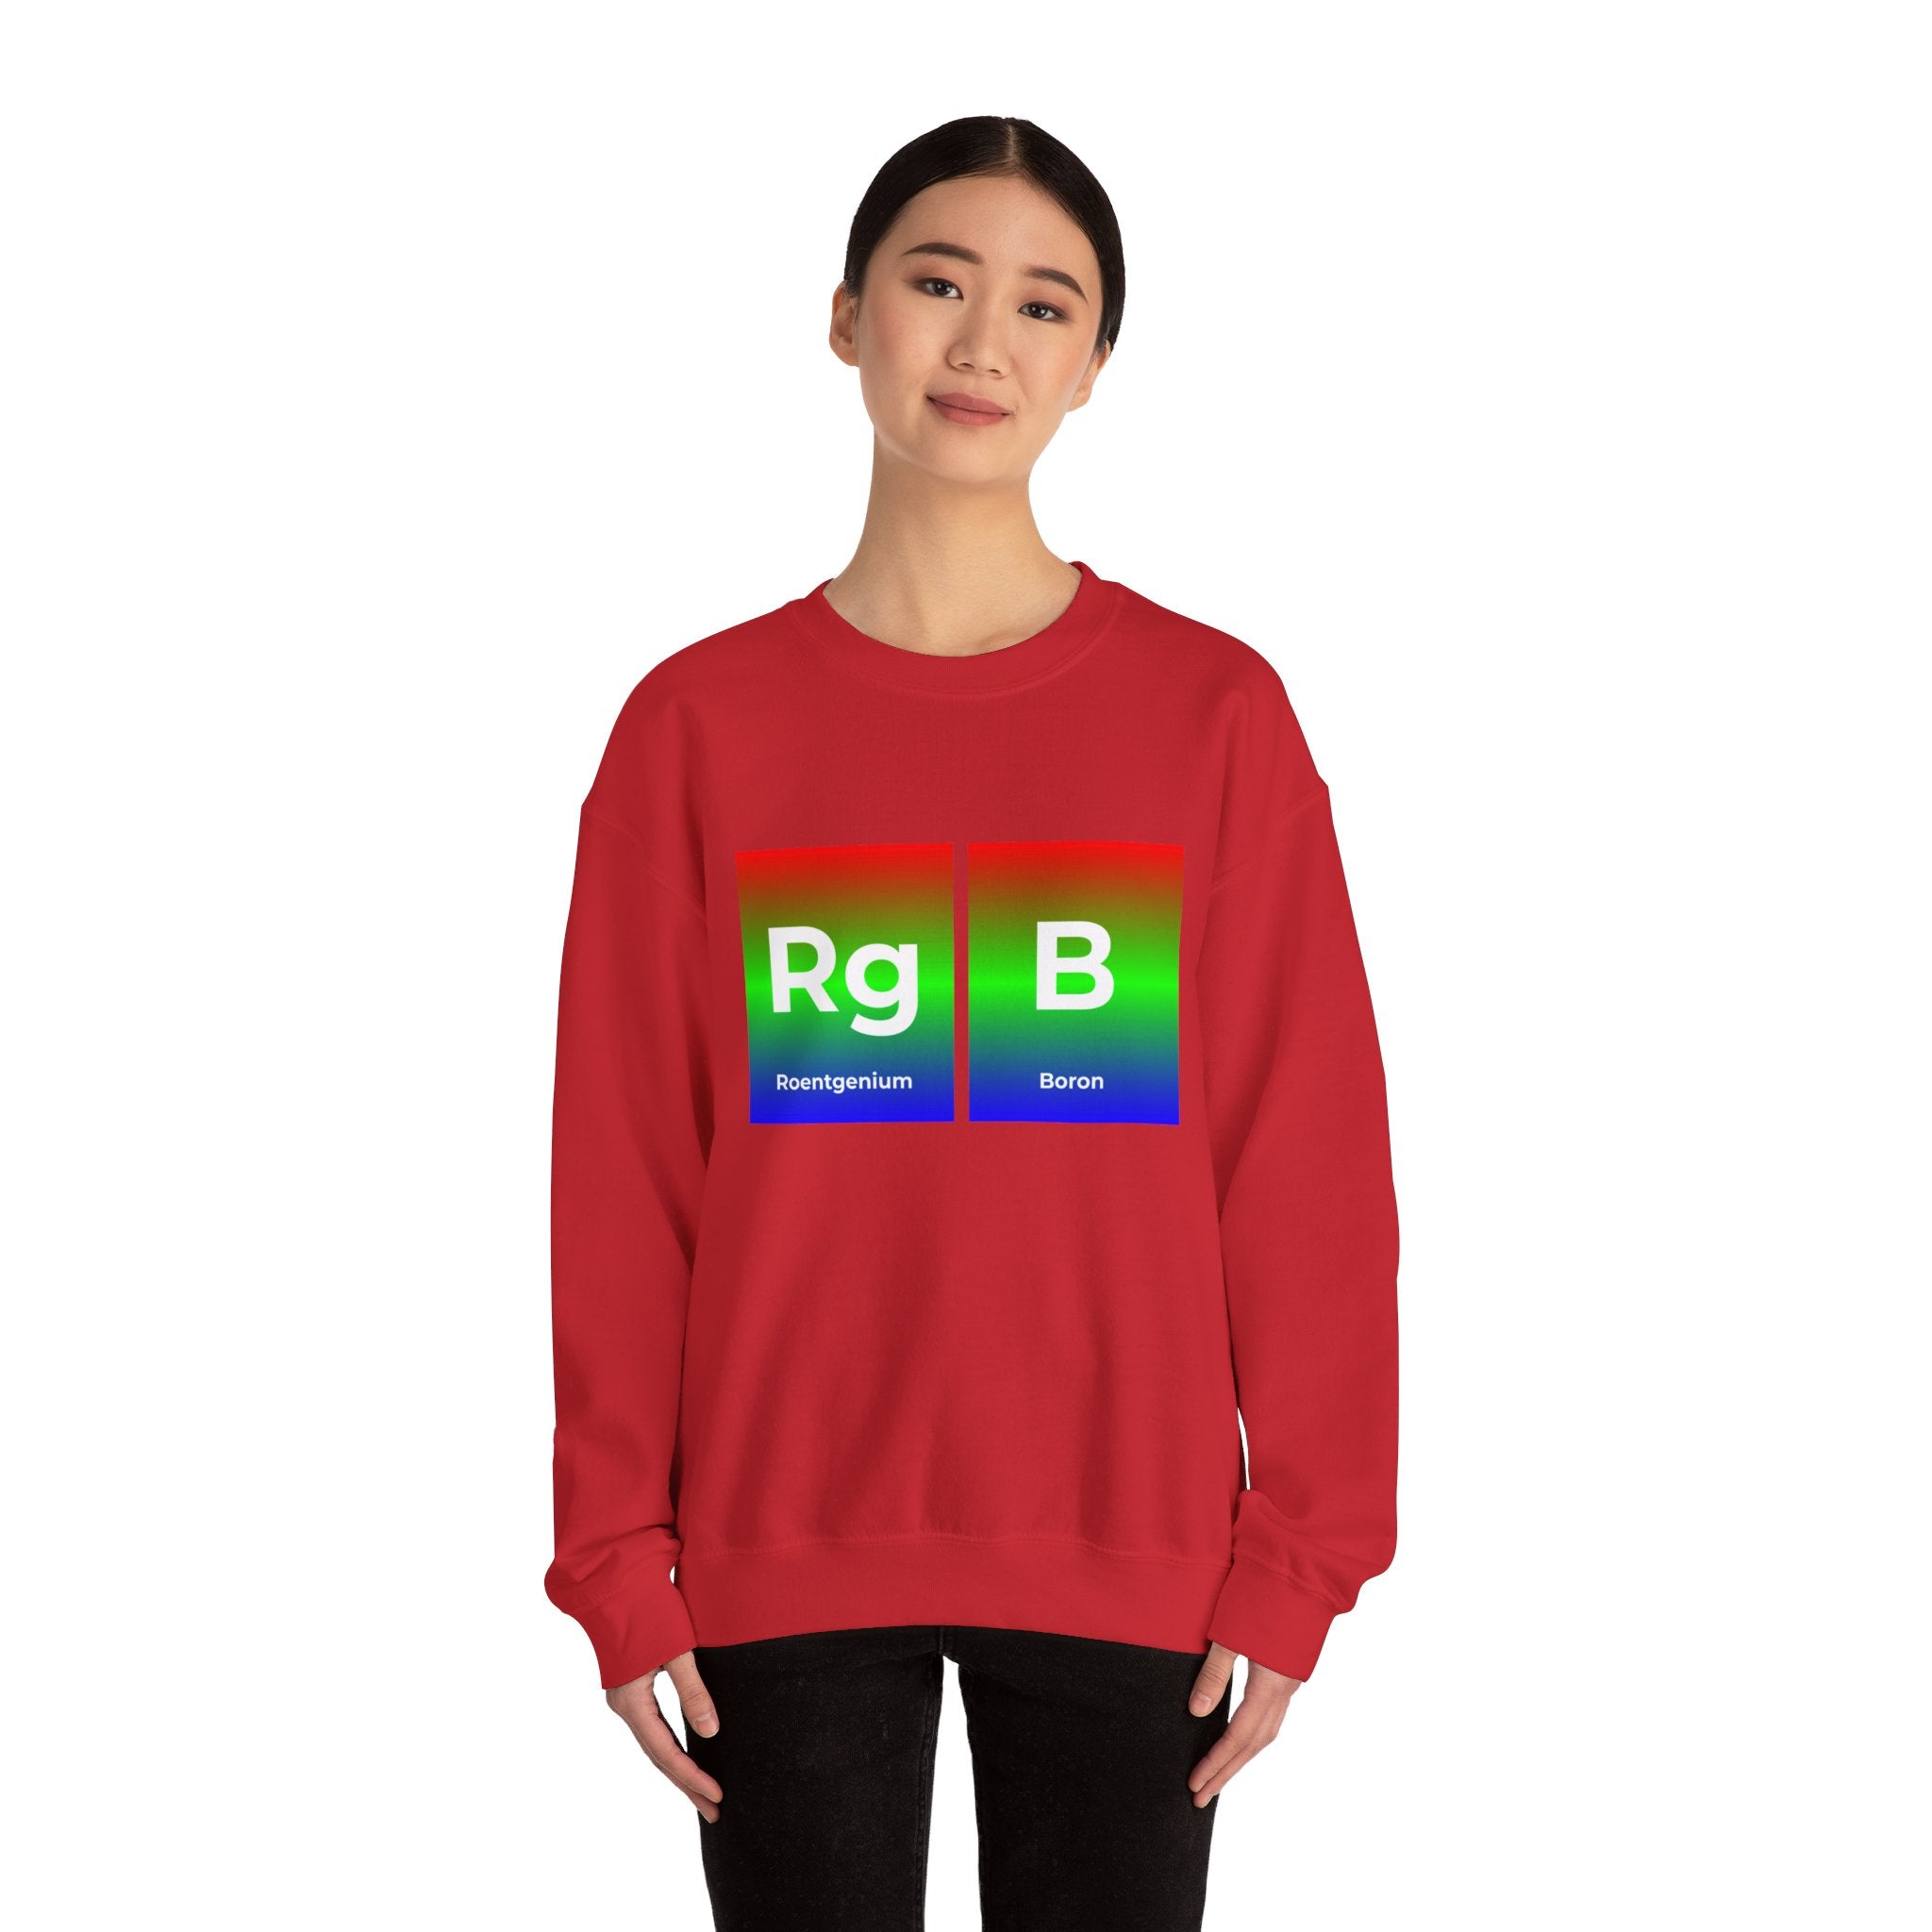 A person wearing a cozy red RG-B - Sweatshirt featuring the stylish periodic table elements Roentgenium (Rg) and Boron (B) printed on it.